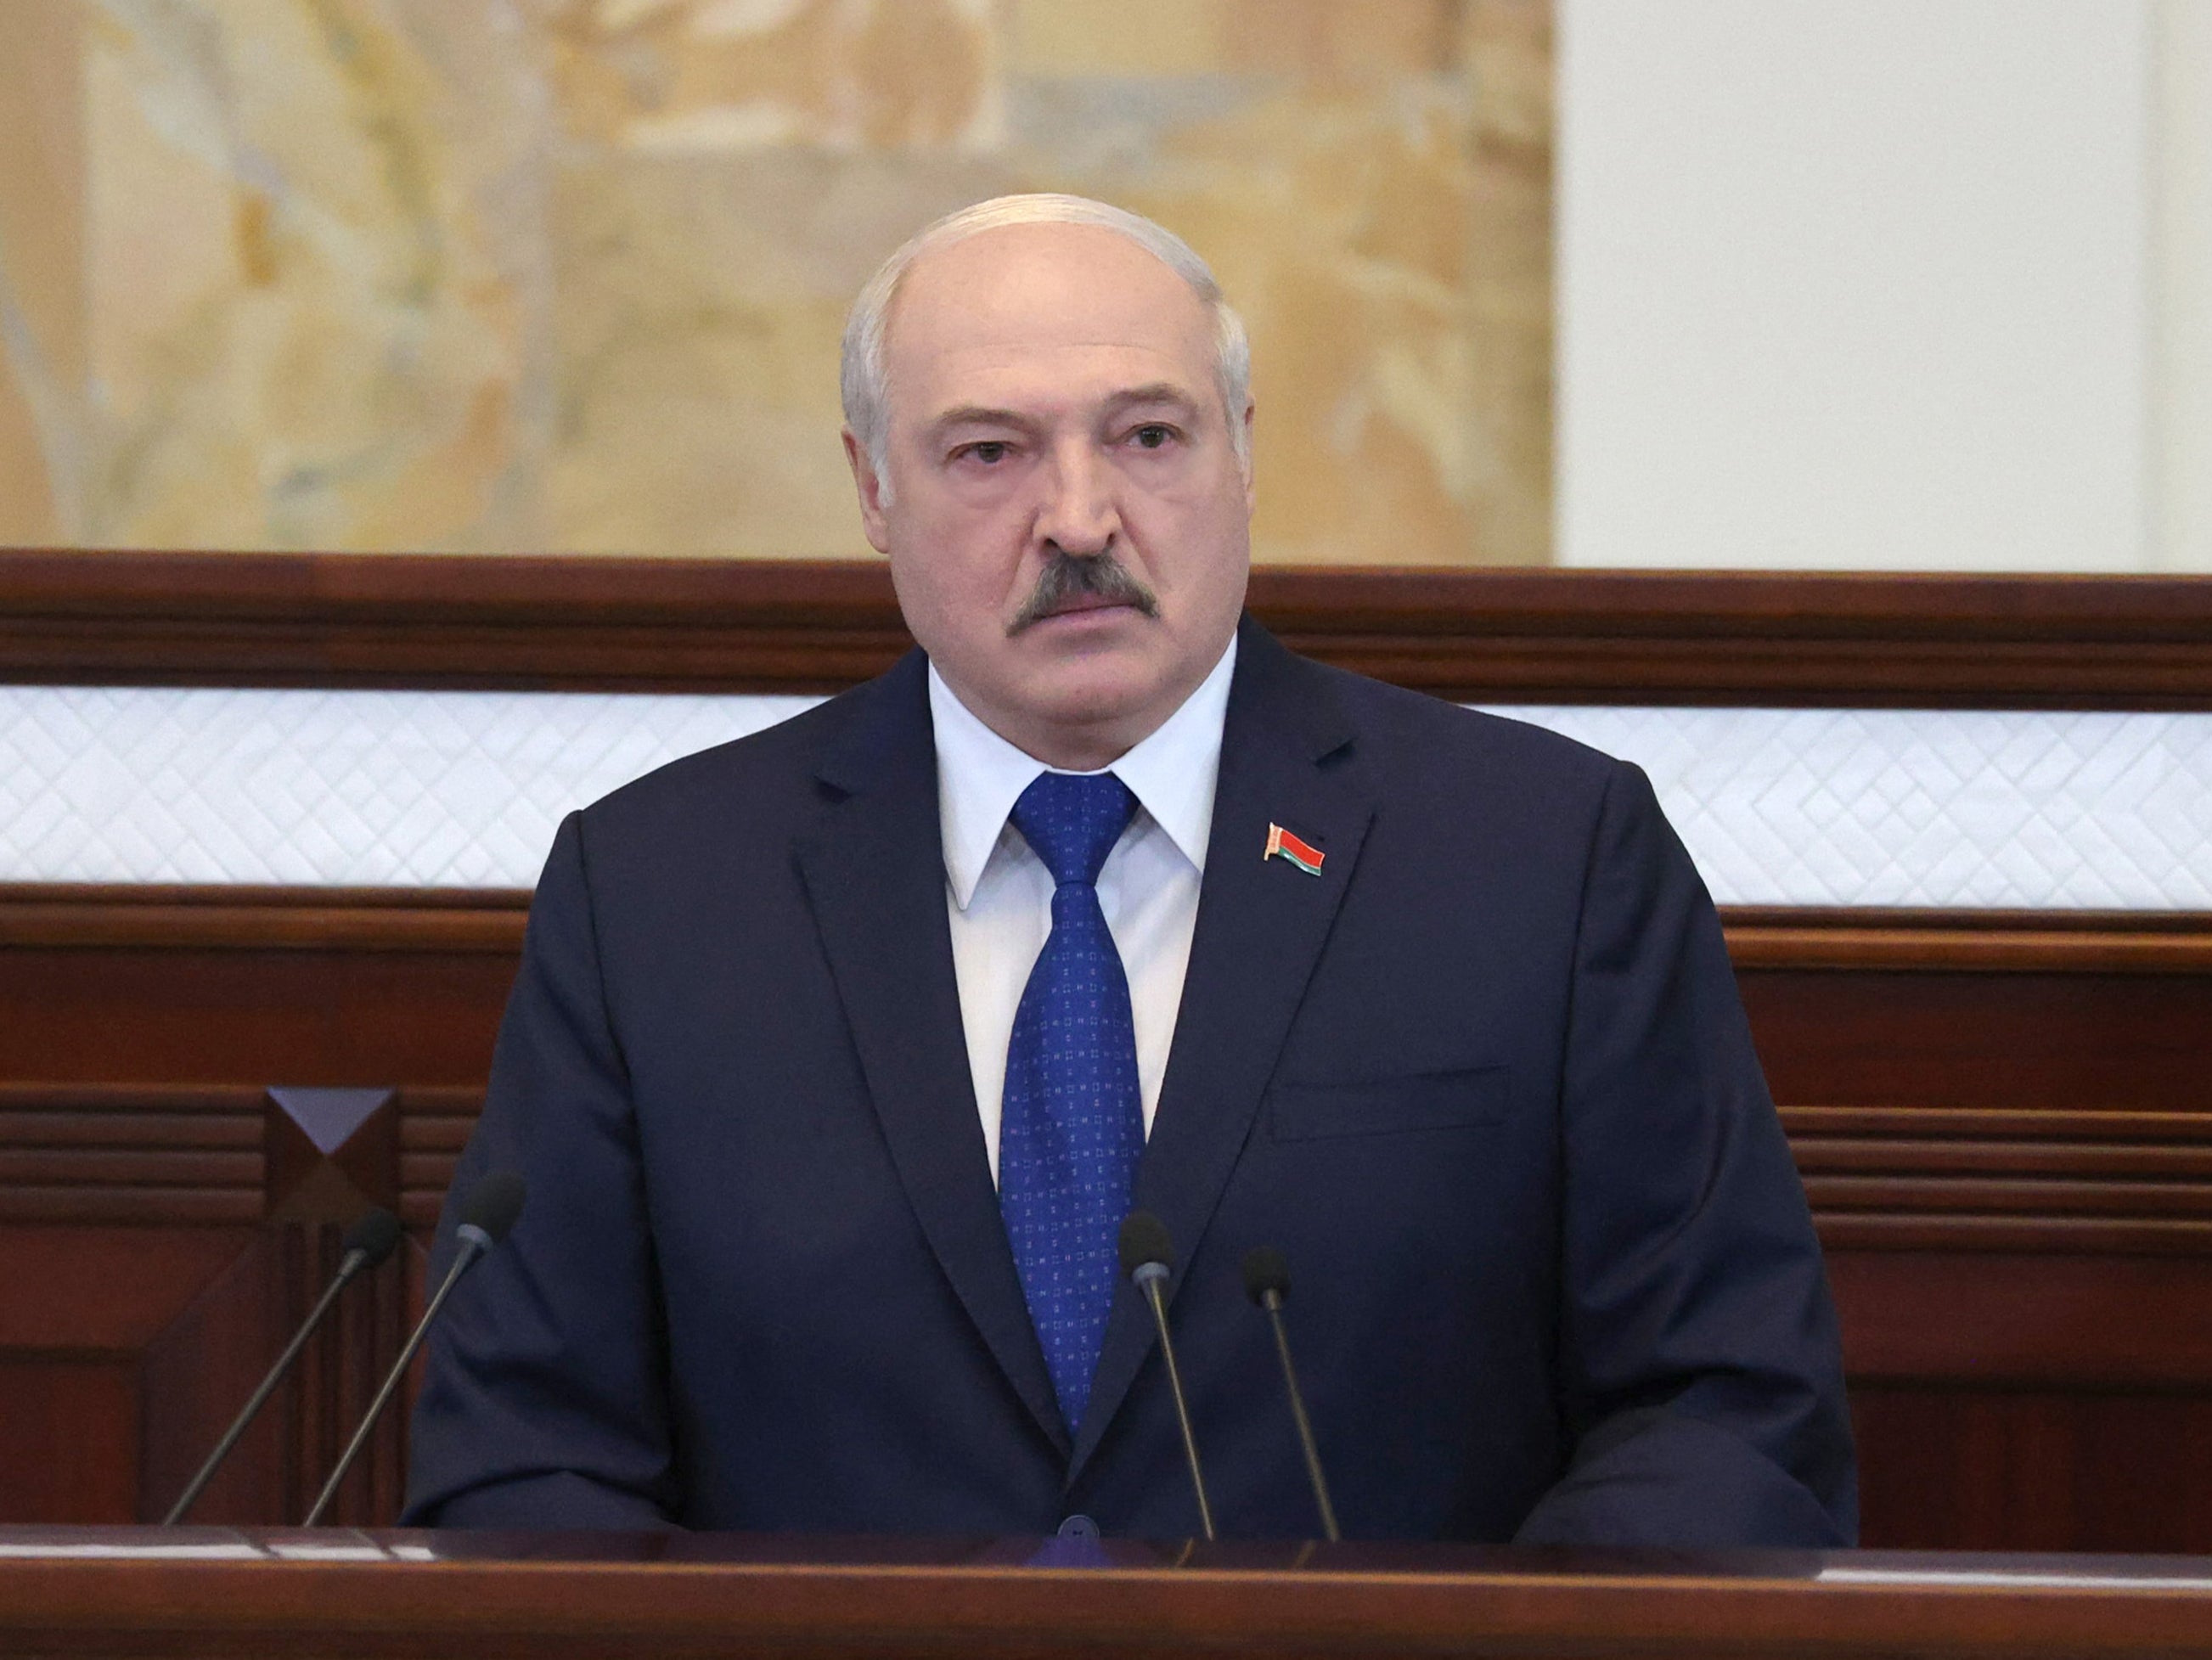 Alexander Lukashenko has faced fierce criticism over the diversion of a plane and arrest of dissident journalist